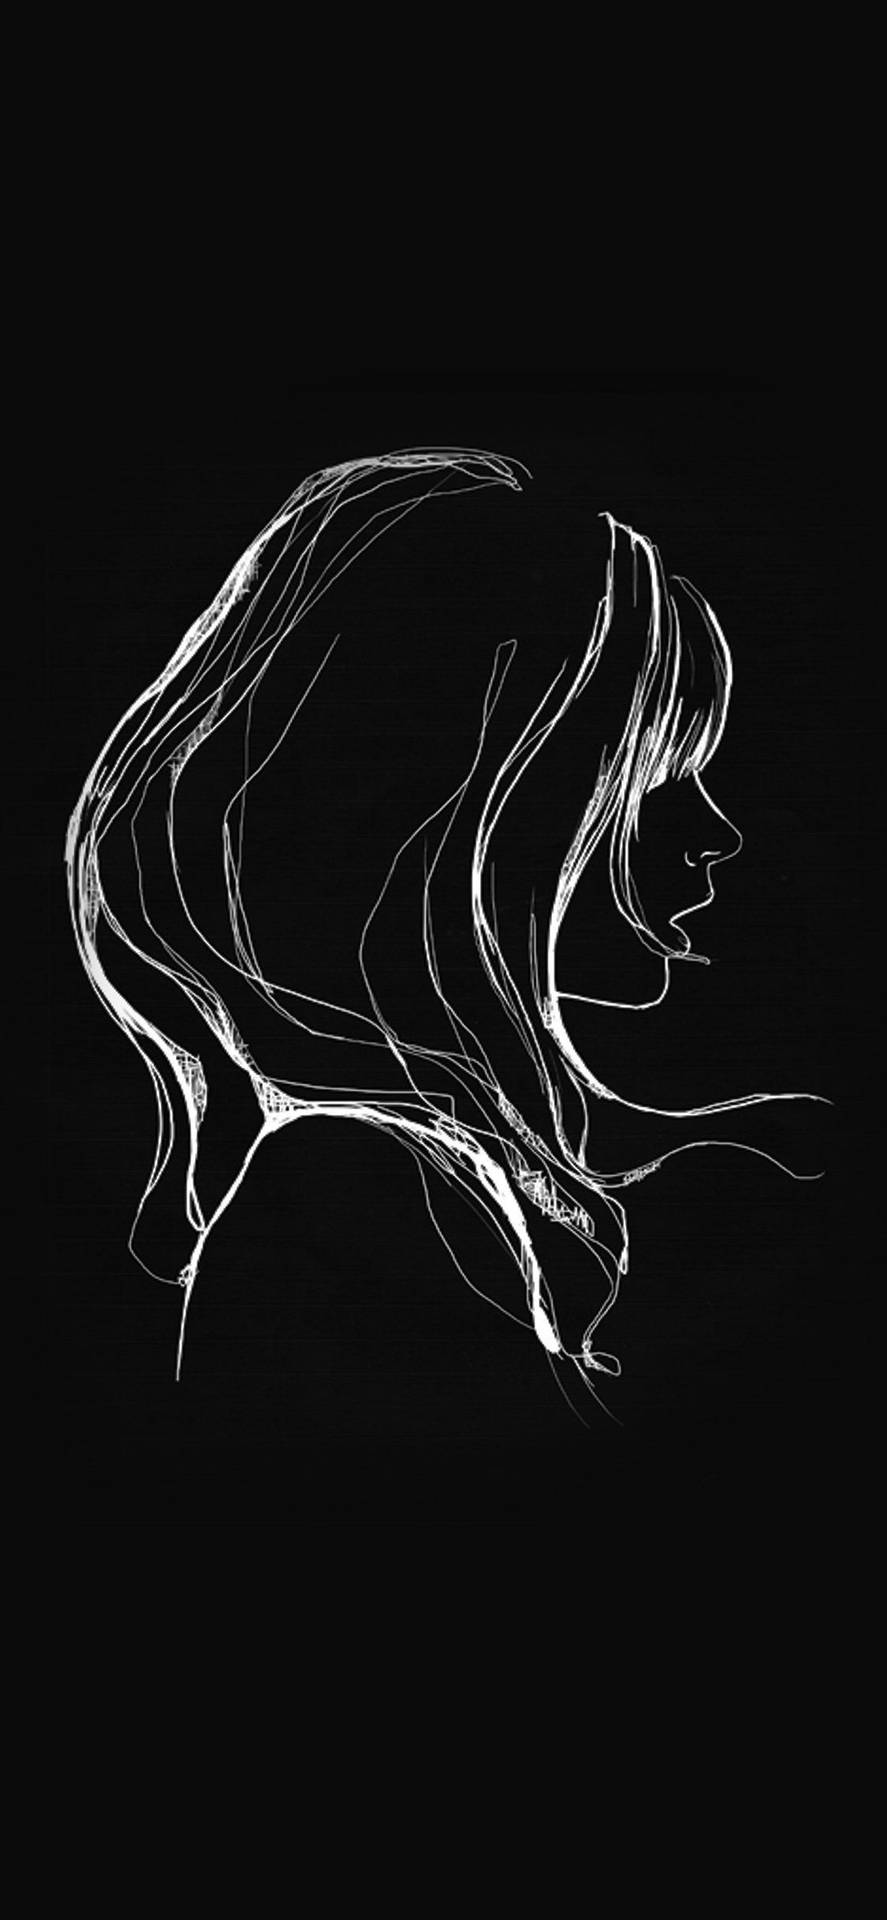 One Line Drawing Woman’s Profile Wallpaper